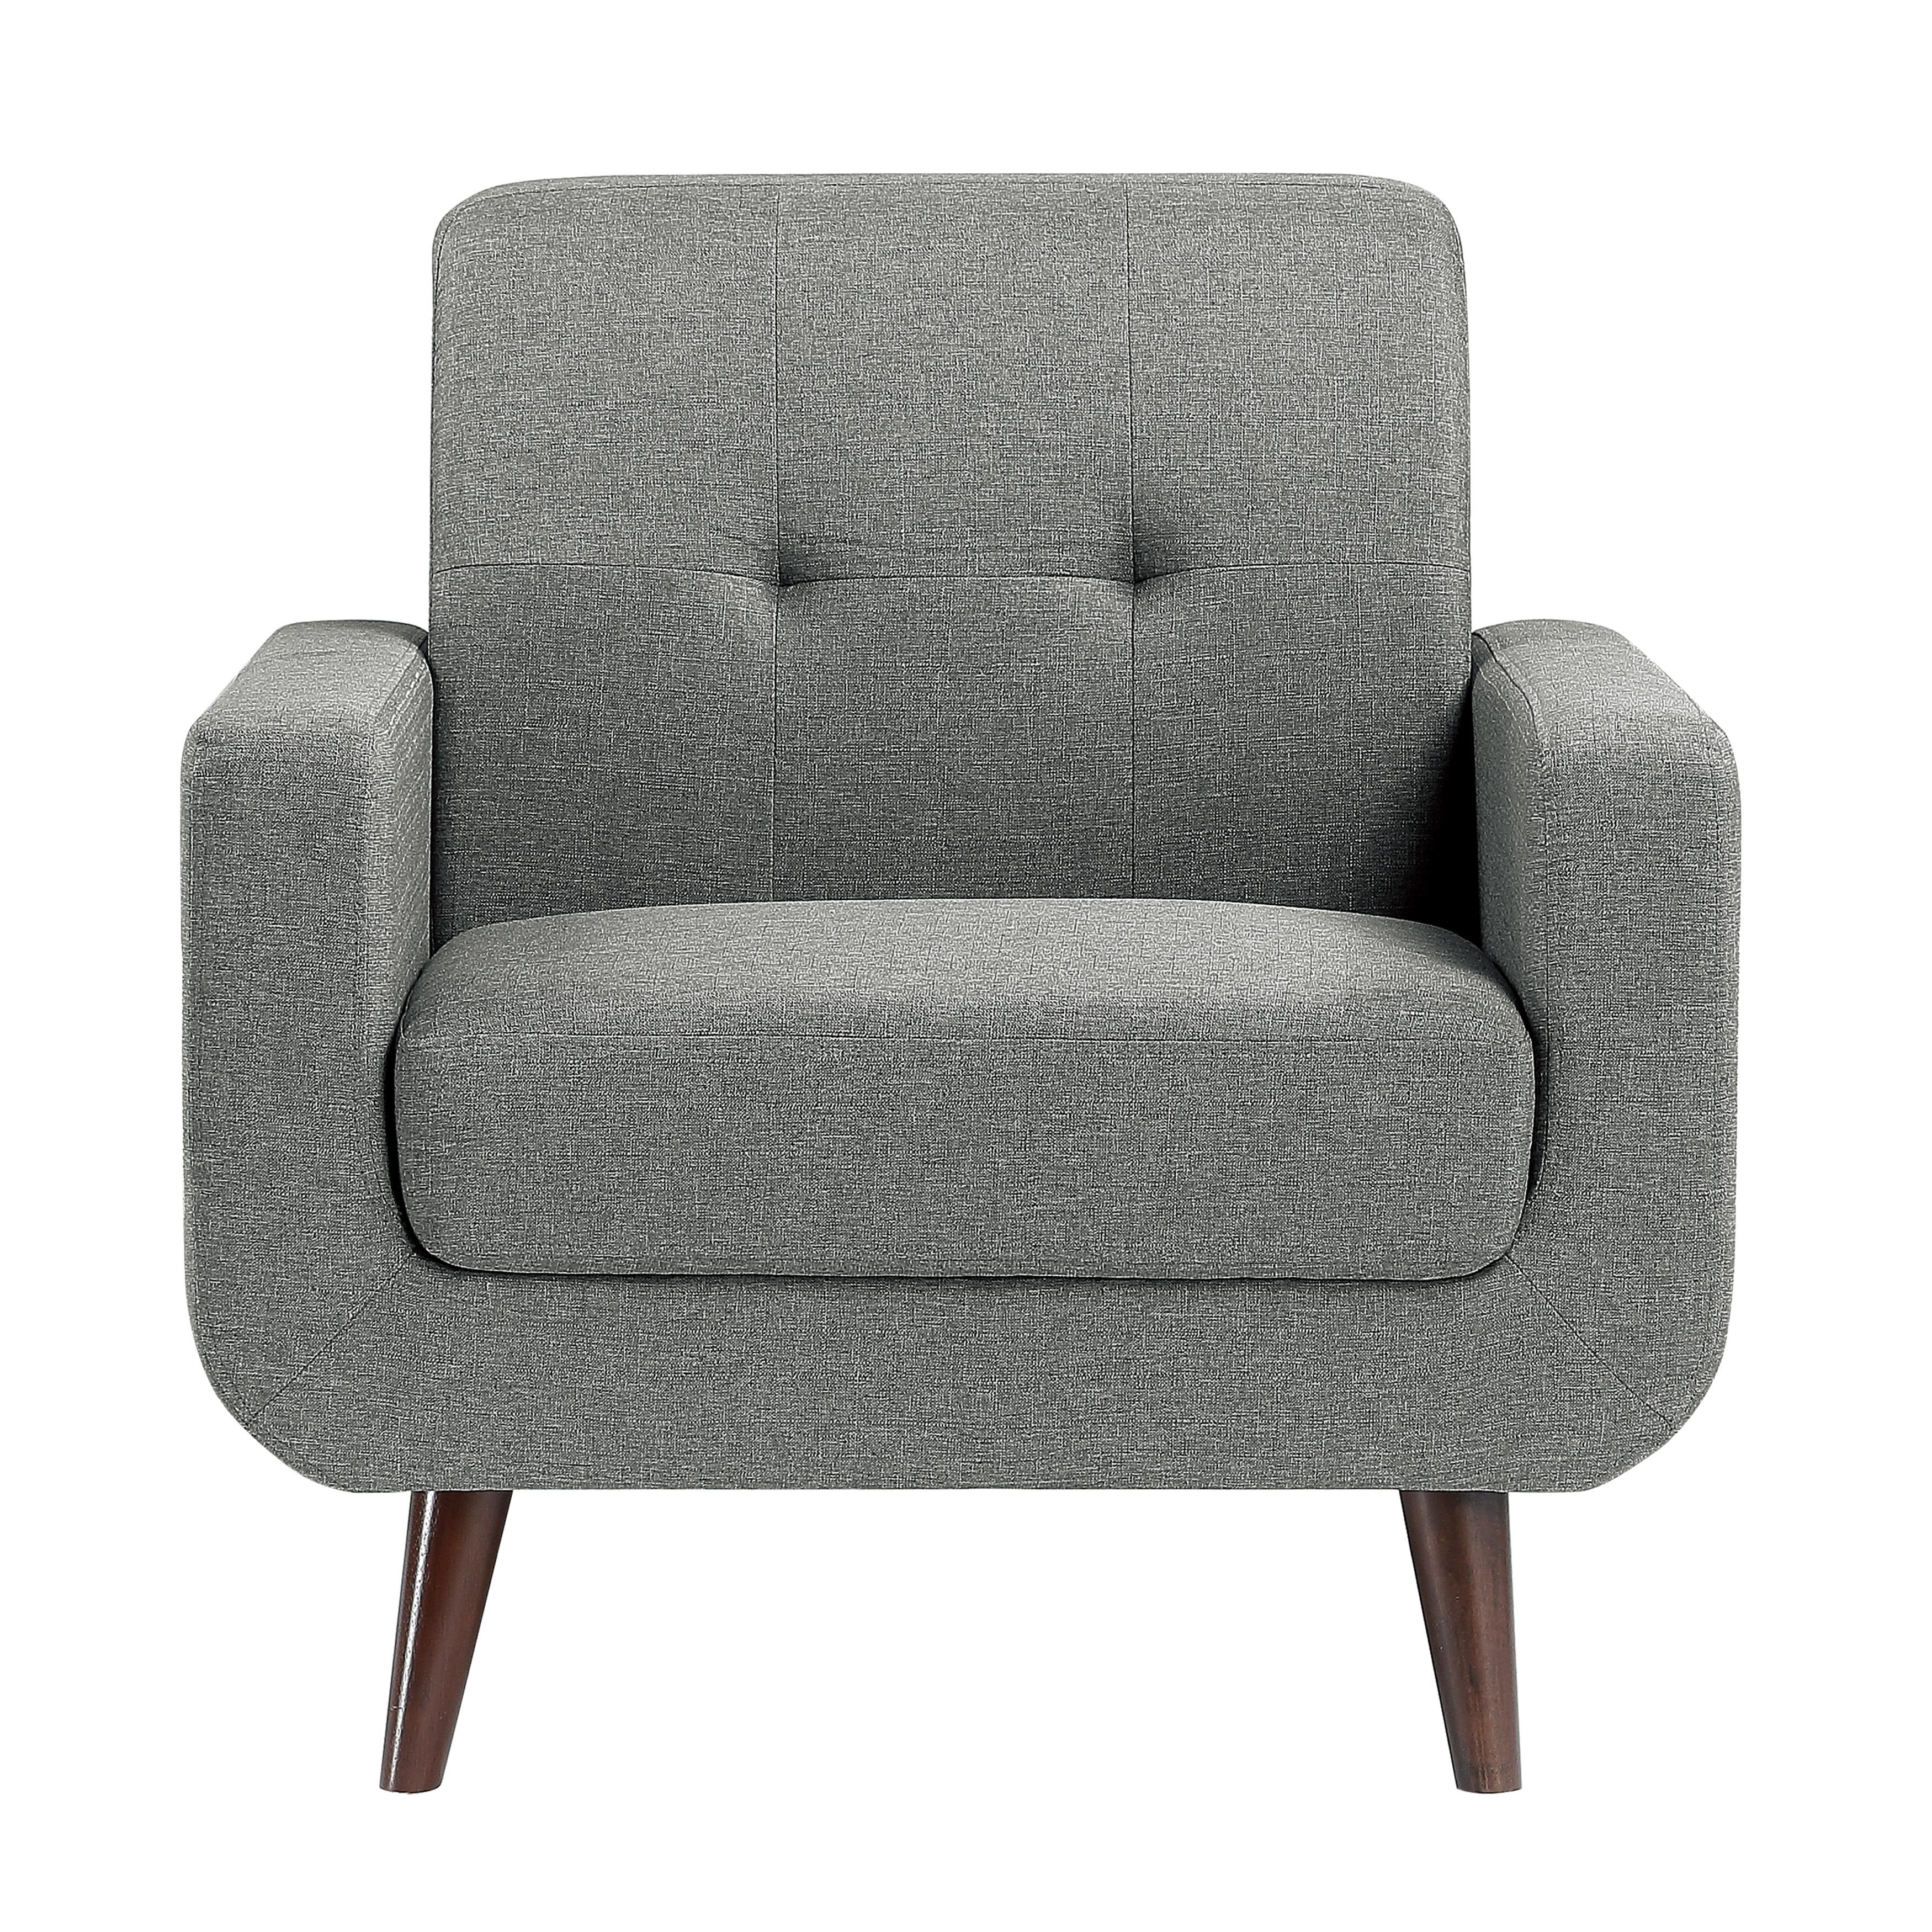 Homelegance 9433GY-1 Fitch Arm Chair